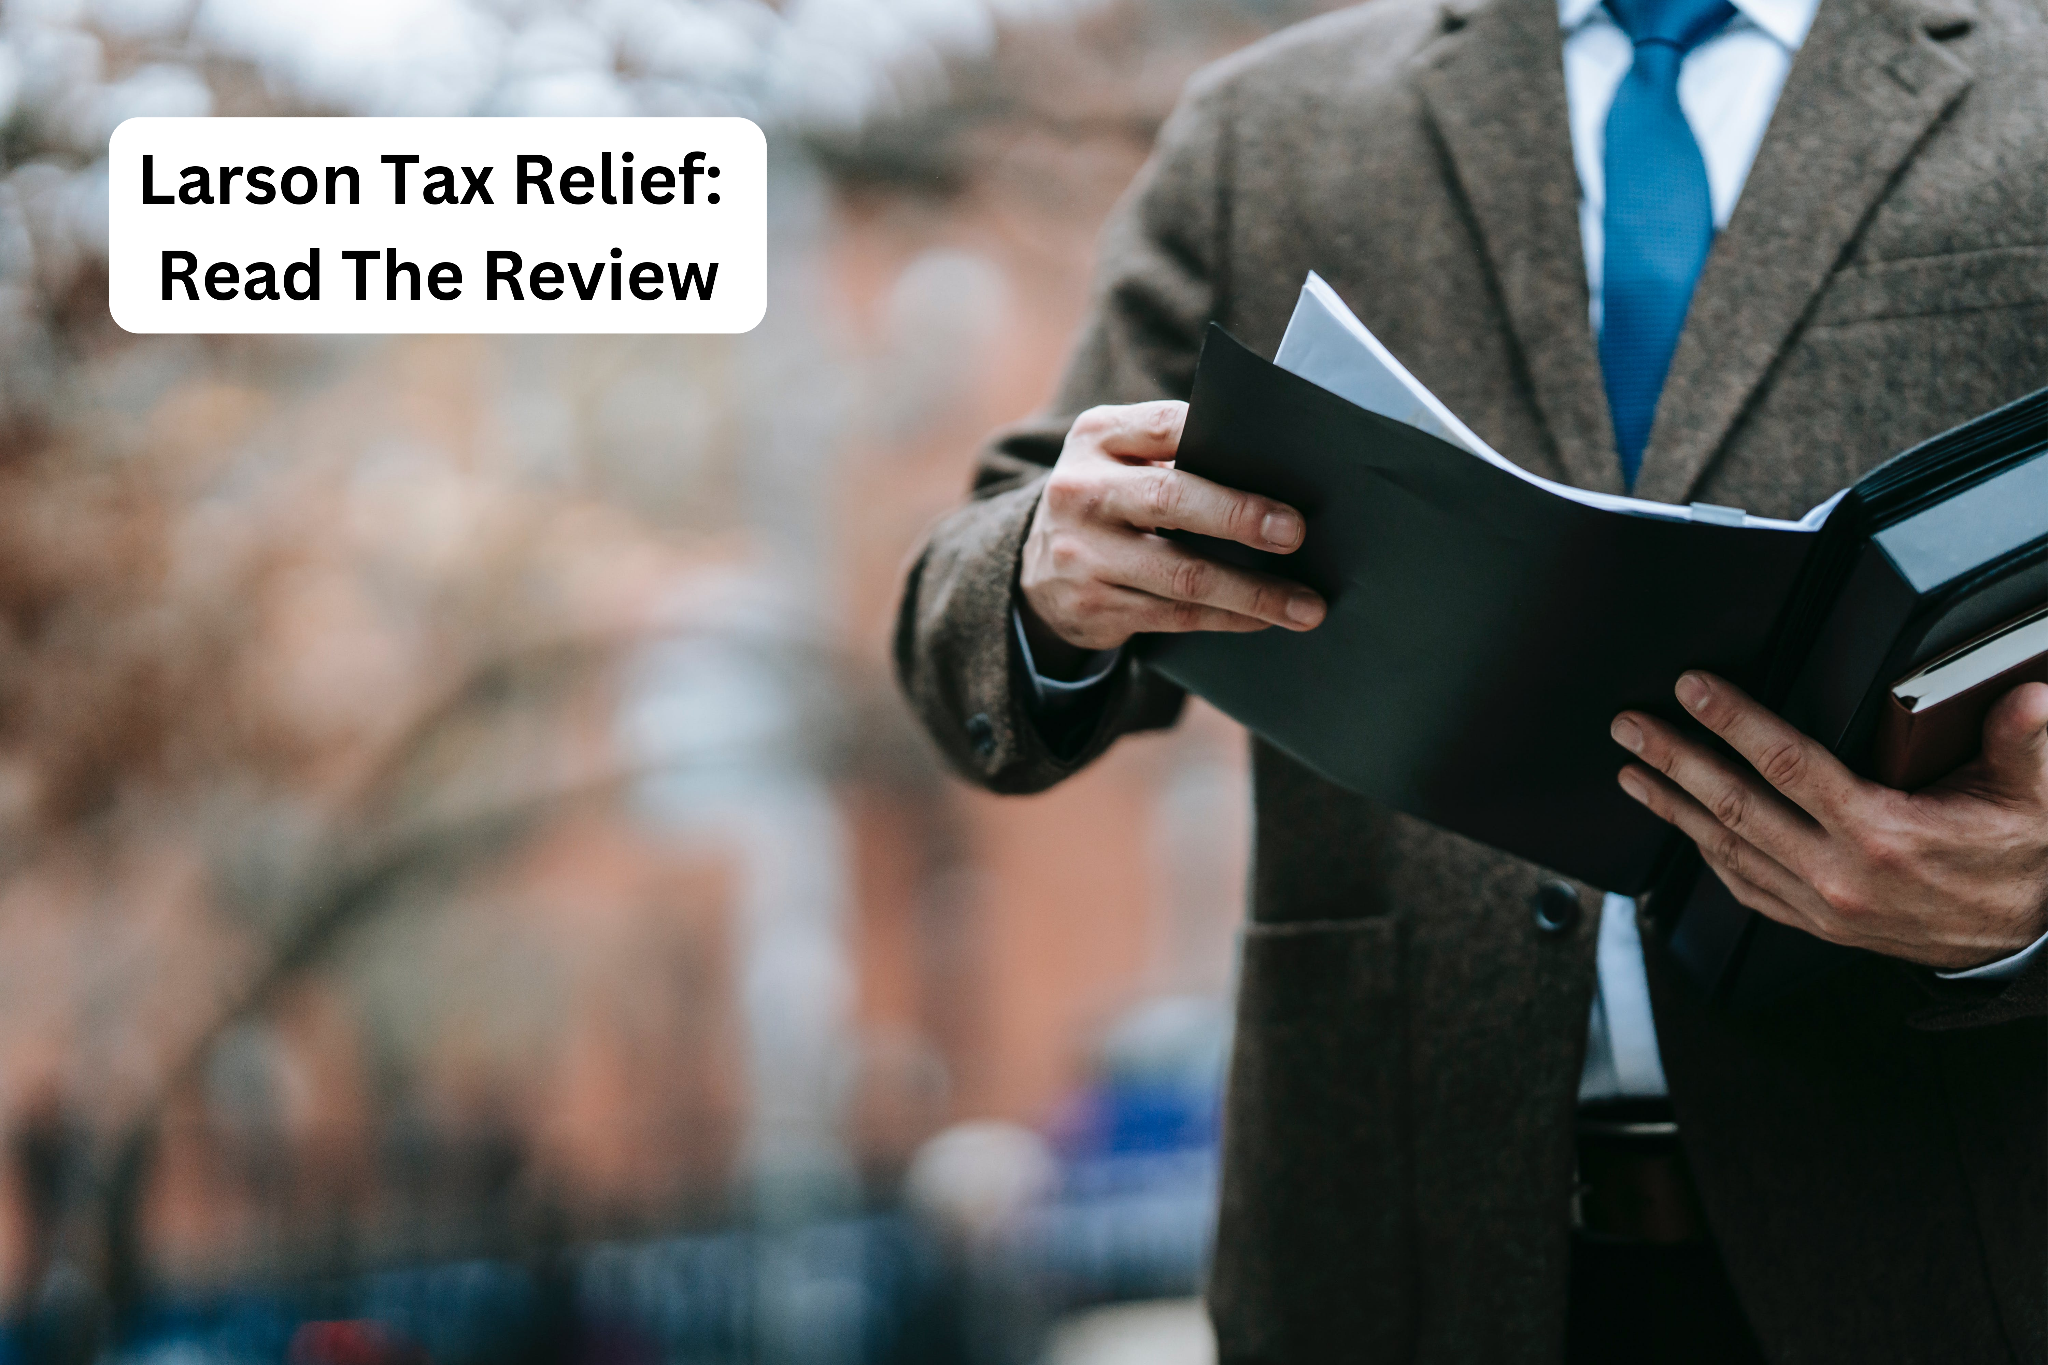 Larson Tax Relief: Read The Review